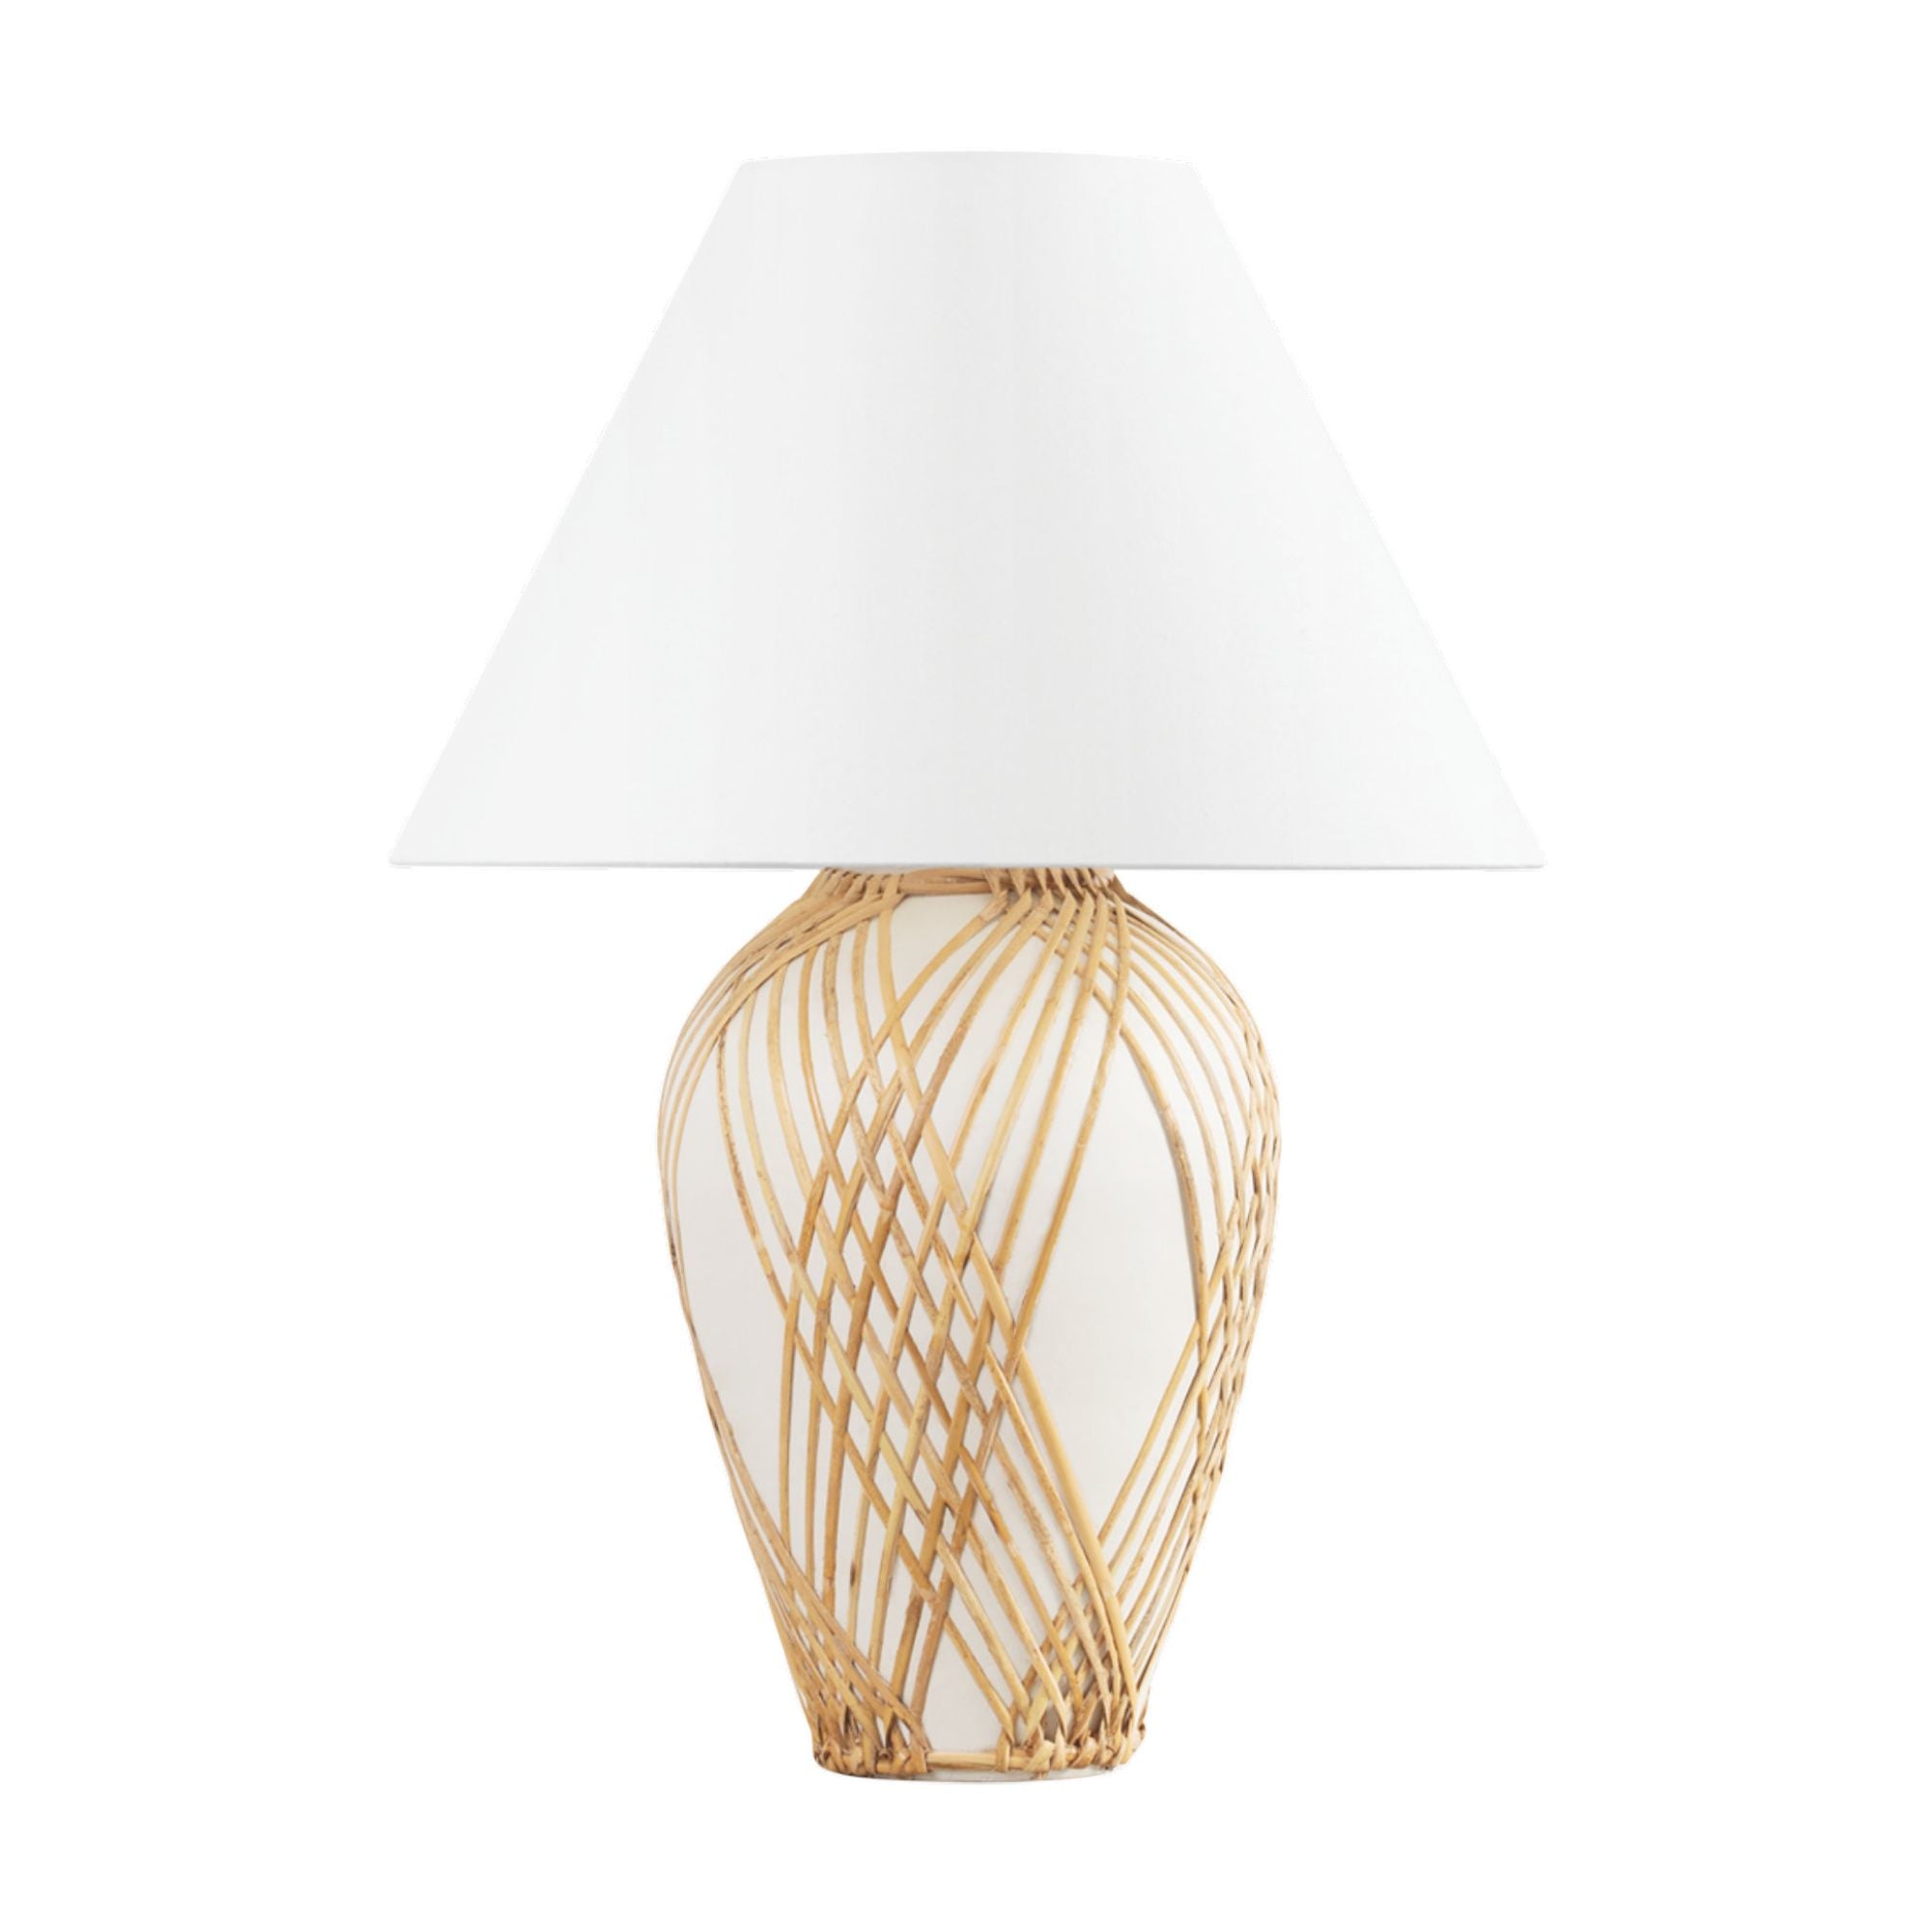 Bayonne 1 Light Table Lamp in Vintage Gold Leaf/ Ceramic White With Rattan